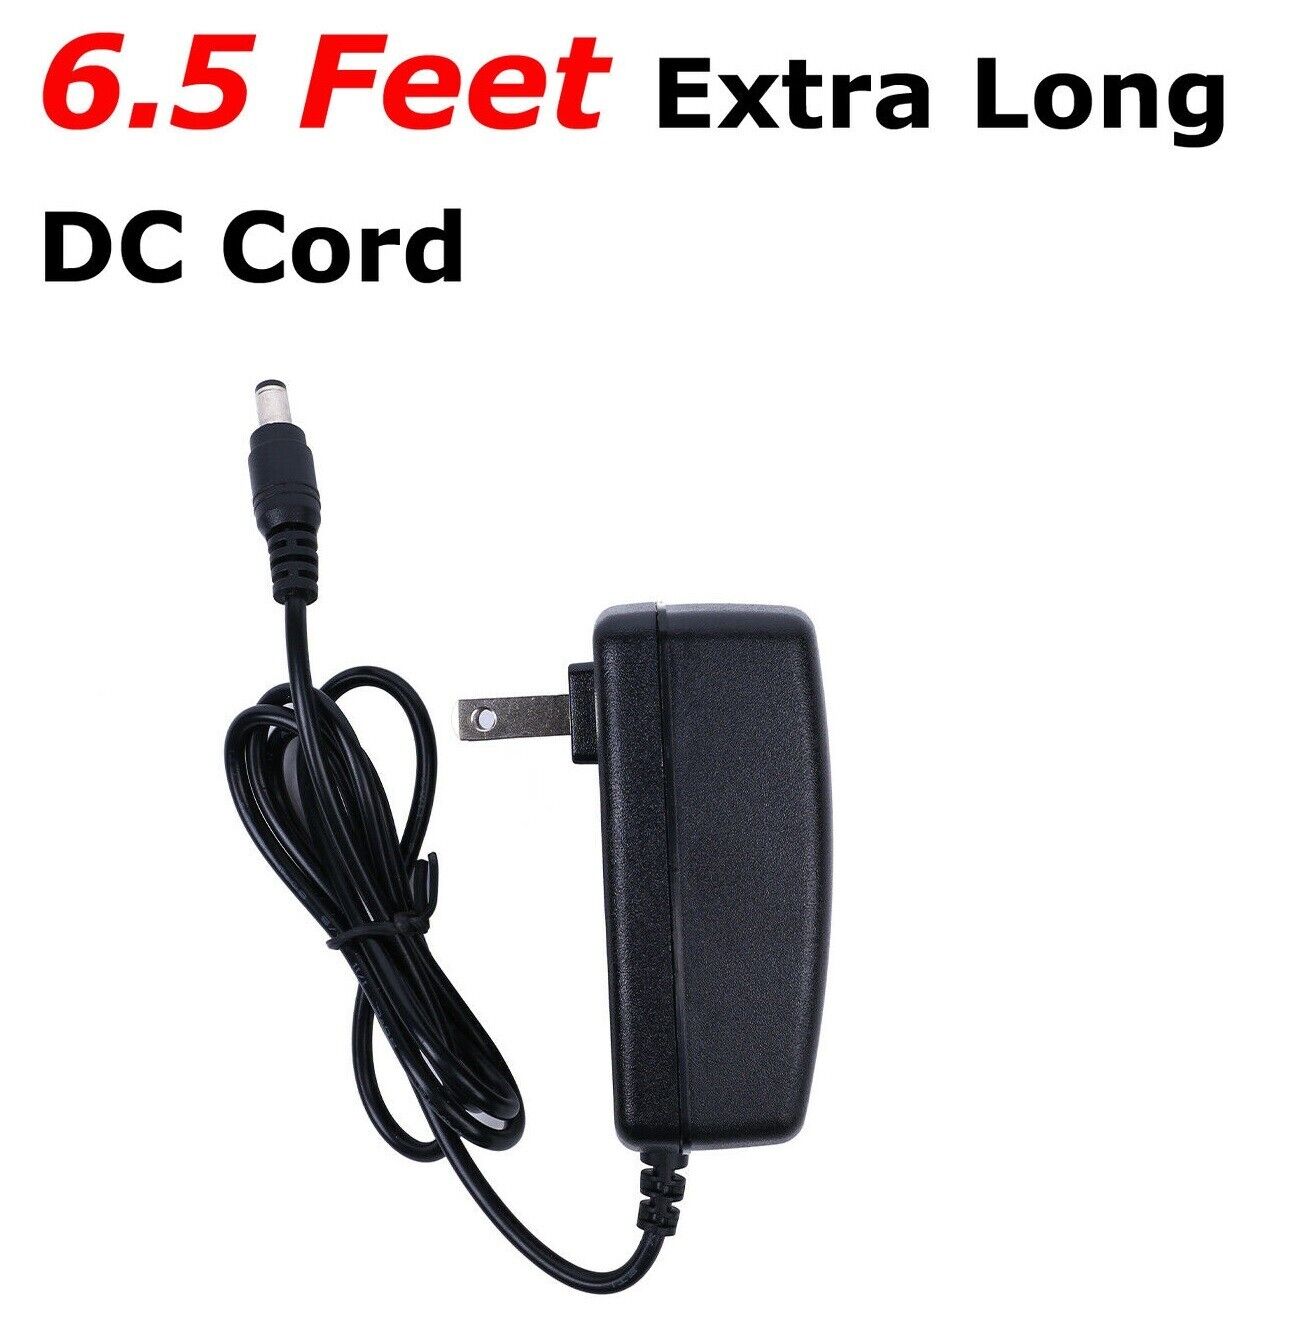 25.2V AC DC Adapter For Macwheel E9 /Pro Foldable Lightweight Electric Scooter